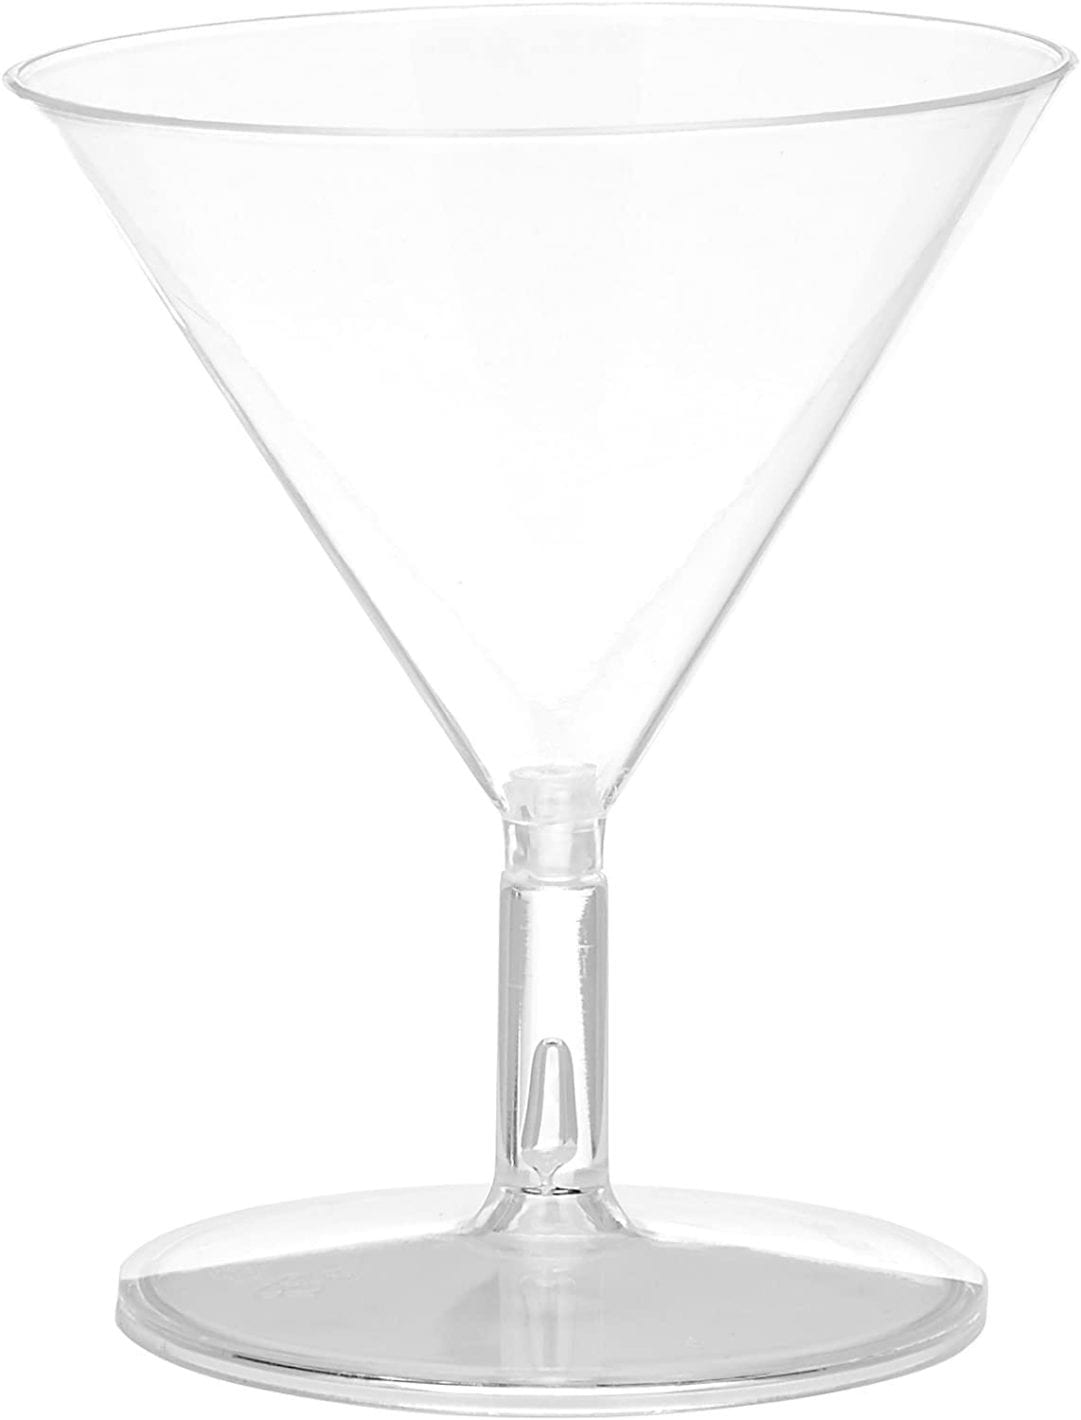 8 Fluid_Ounces Party Essentials N81290 Plastic Martini Glasses Assorted Neon 